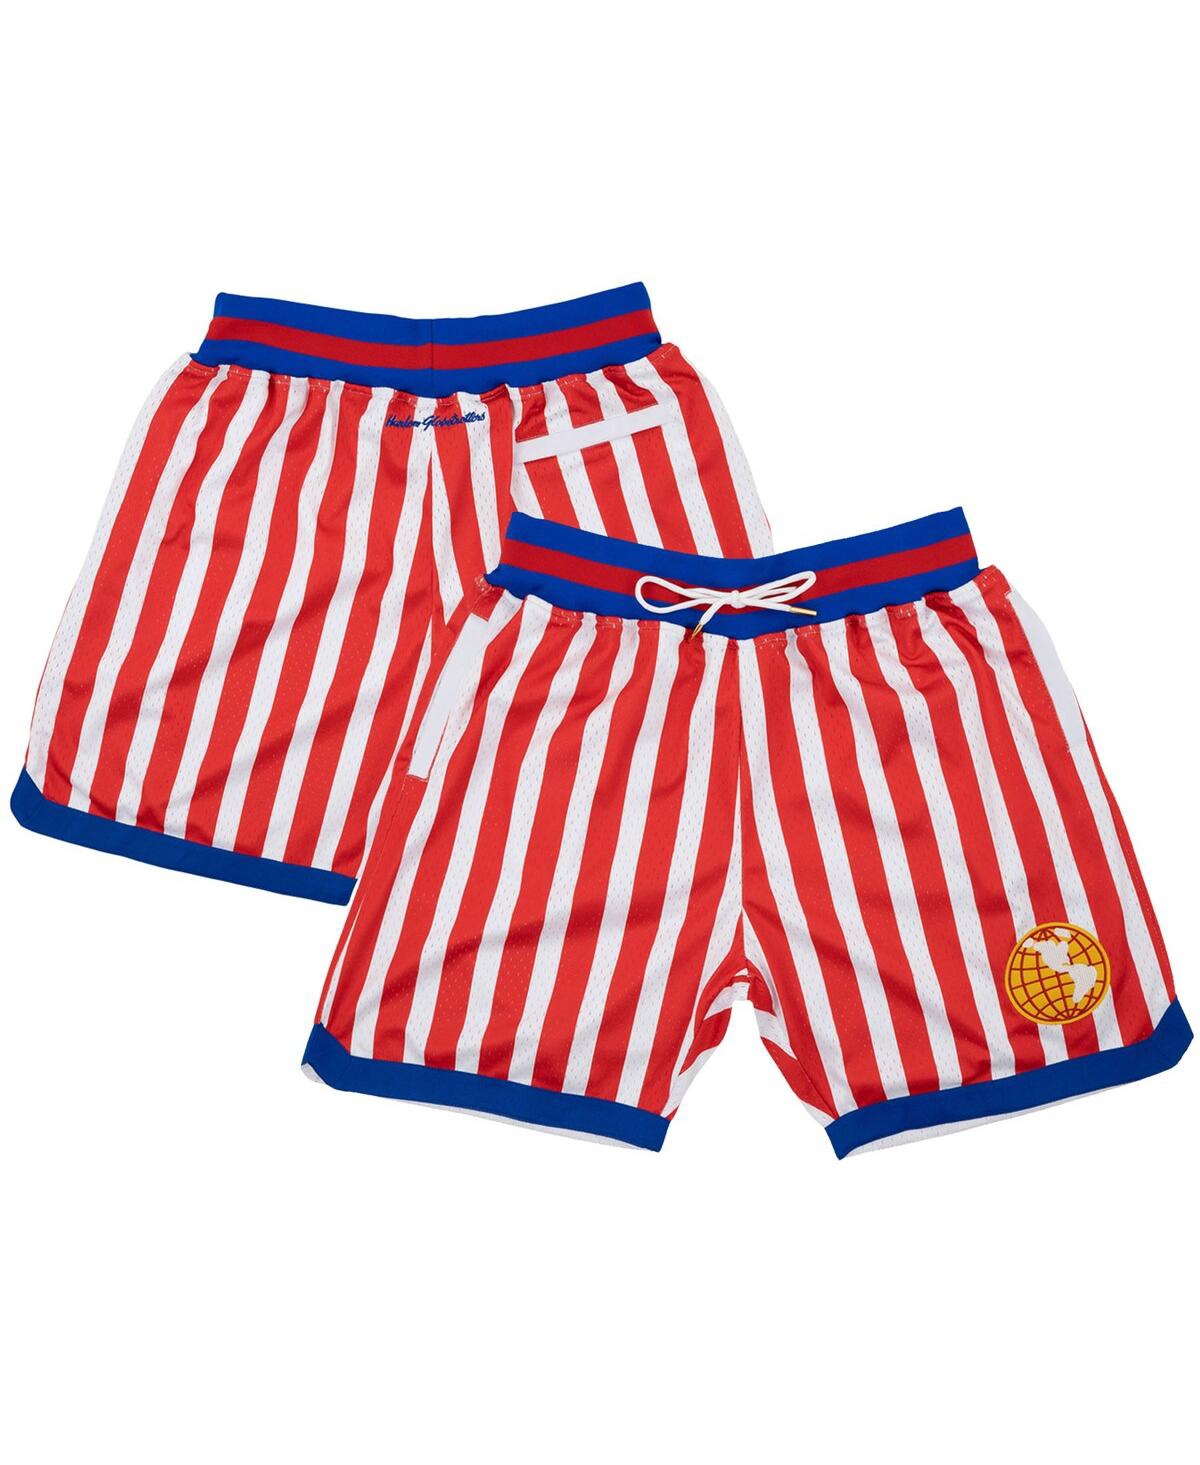 Men's Rings & Crwns Red, White Harlem Globetrotters Triple Double Shorts - Red, White